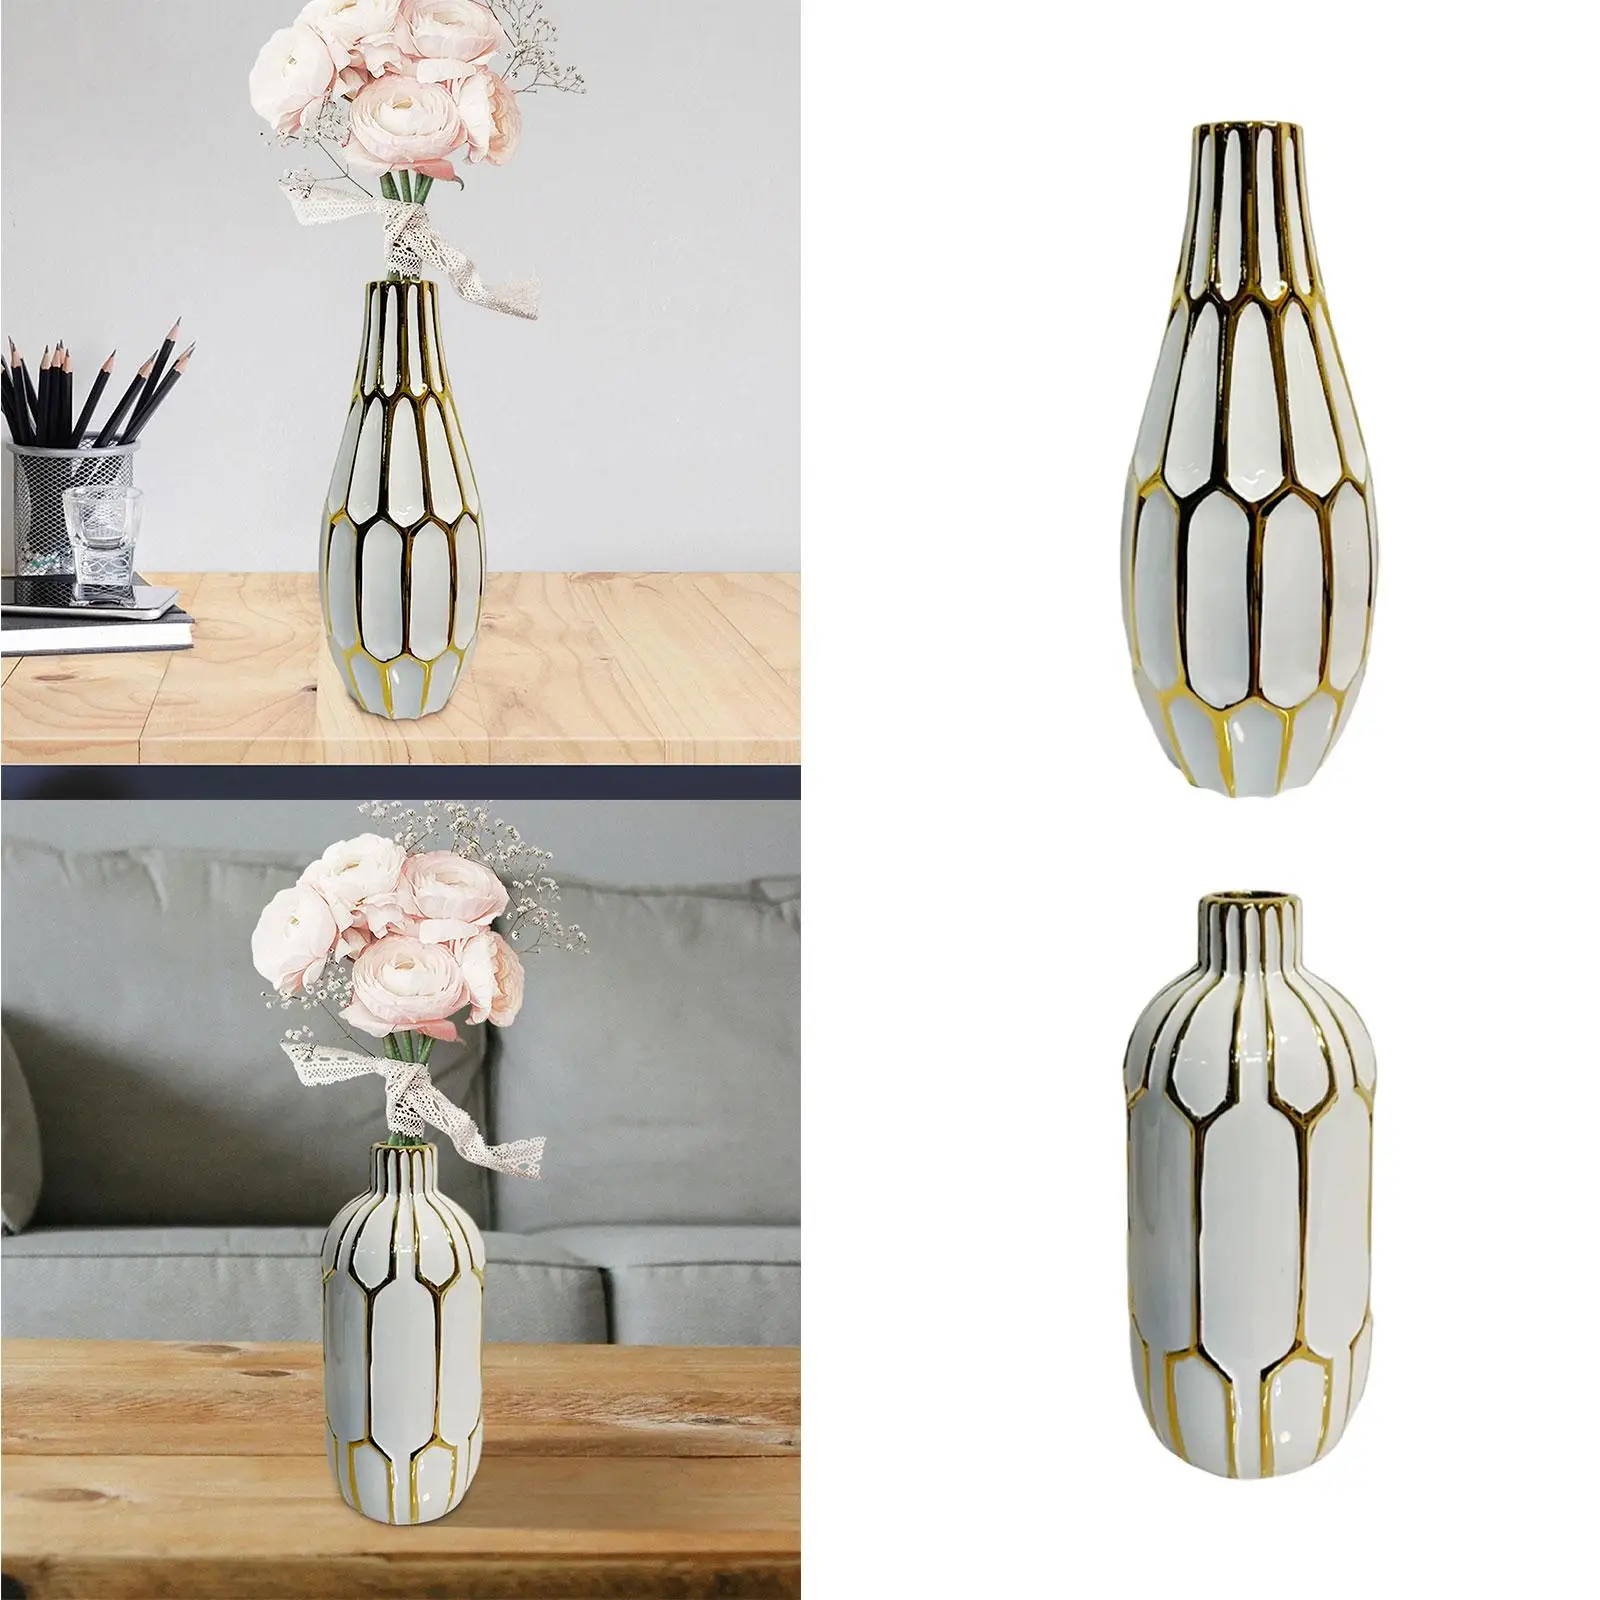 Flower Vase Collectible Art Ceramic Vase for Drawing Room Cafe Countertop